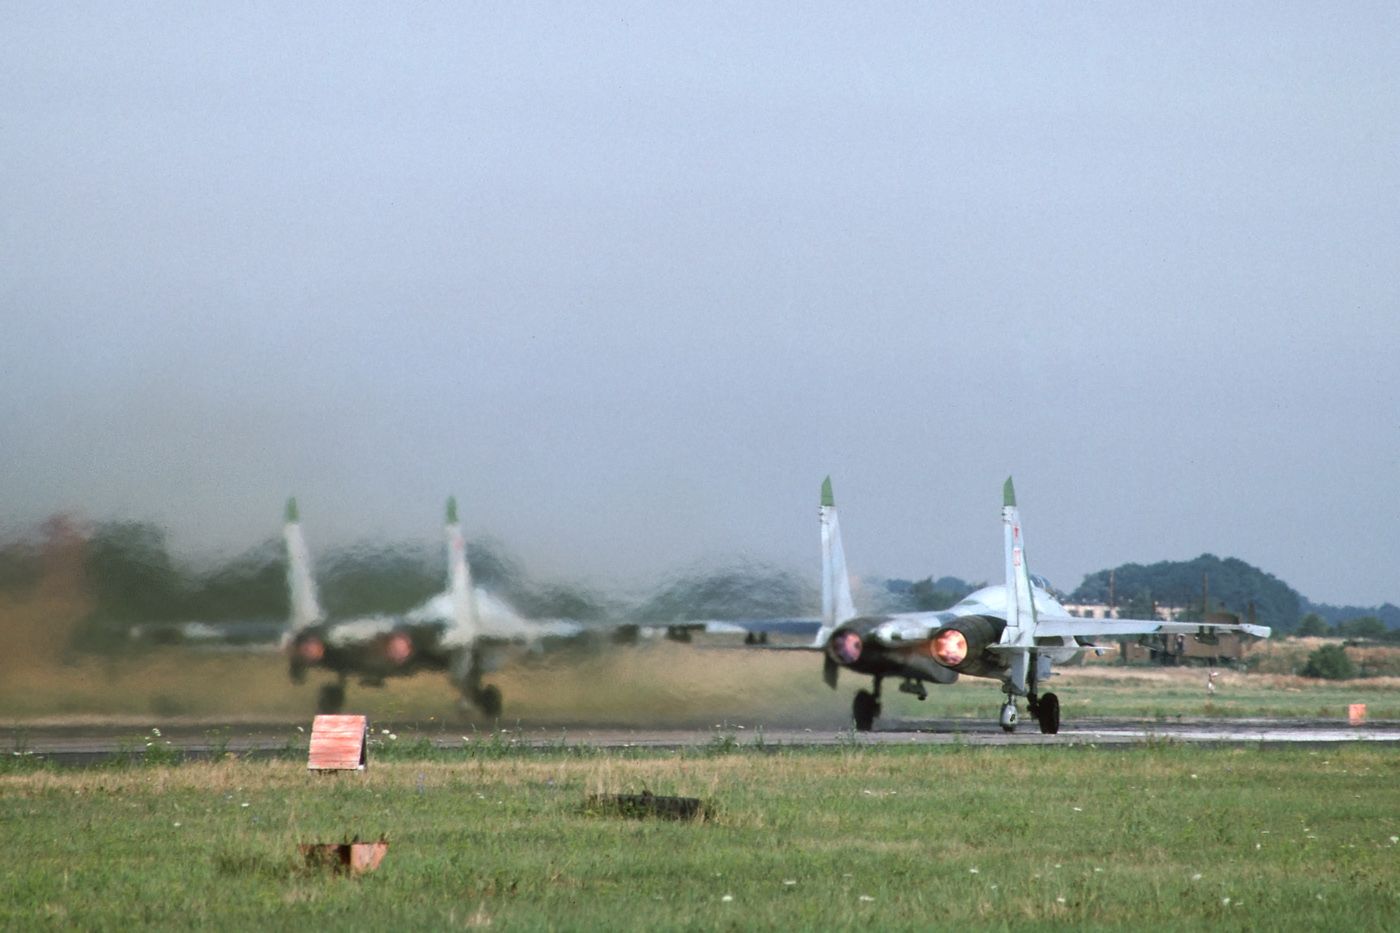 Two Su-27 Flankers ready to take off.